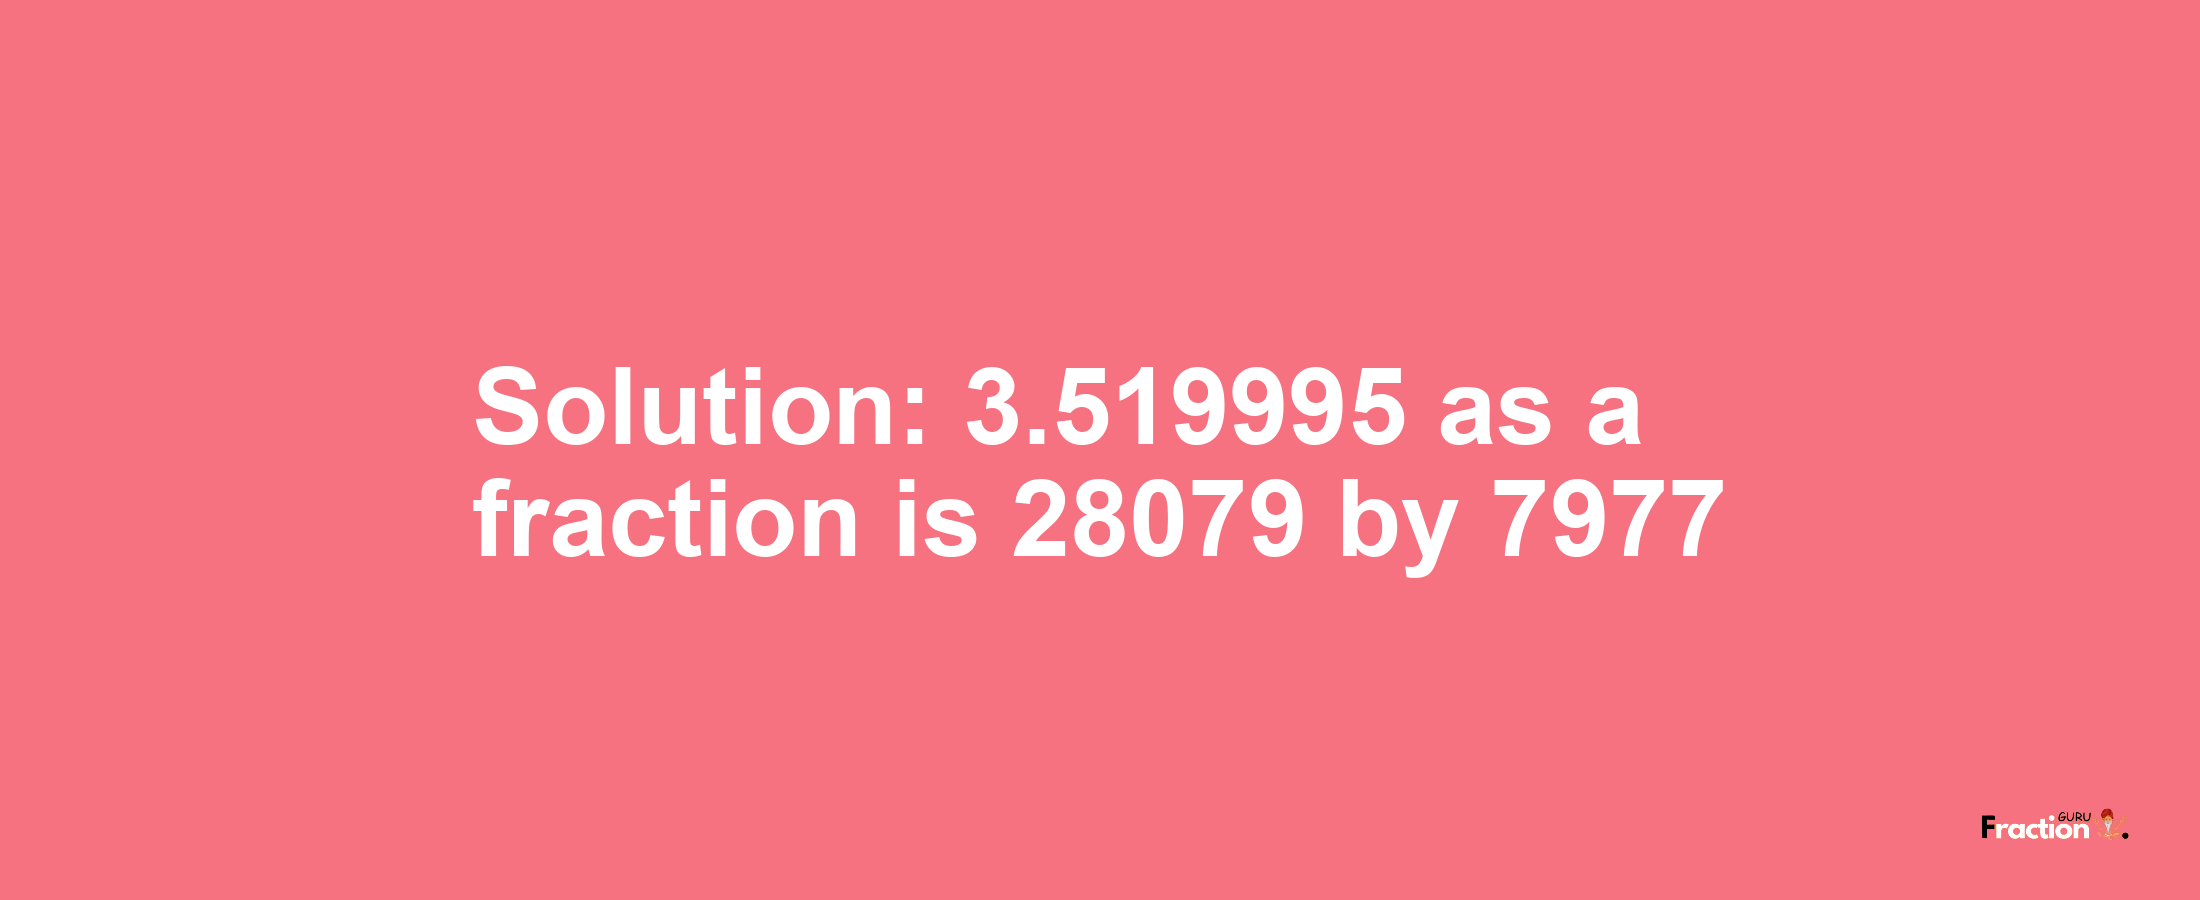 Solution:3.519995 as a fraction is 28079/7977